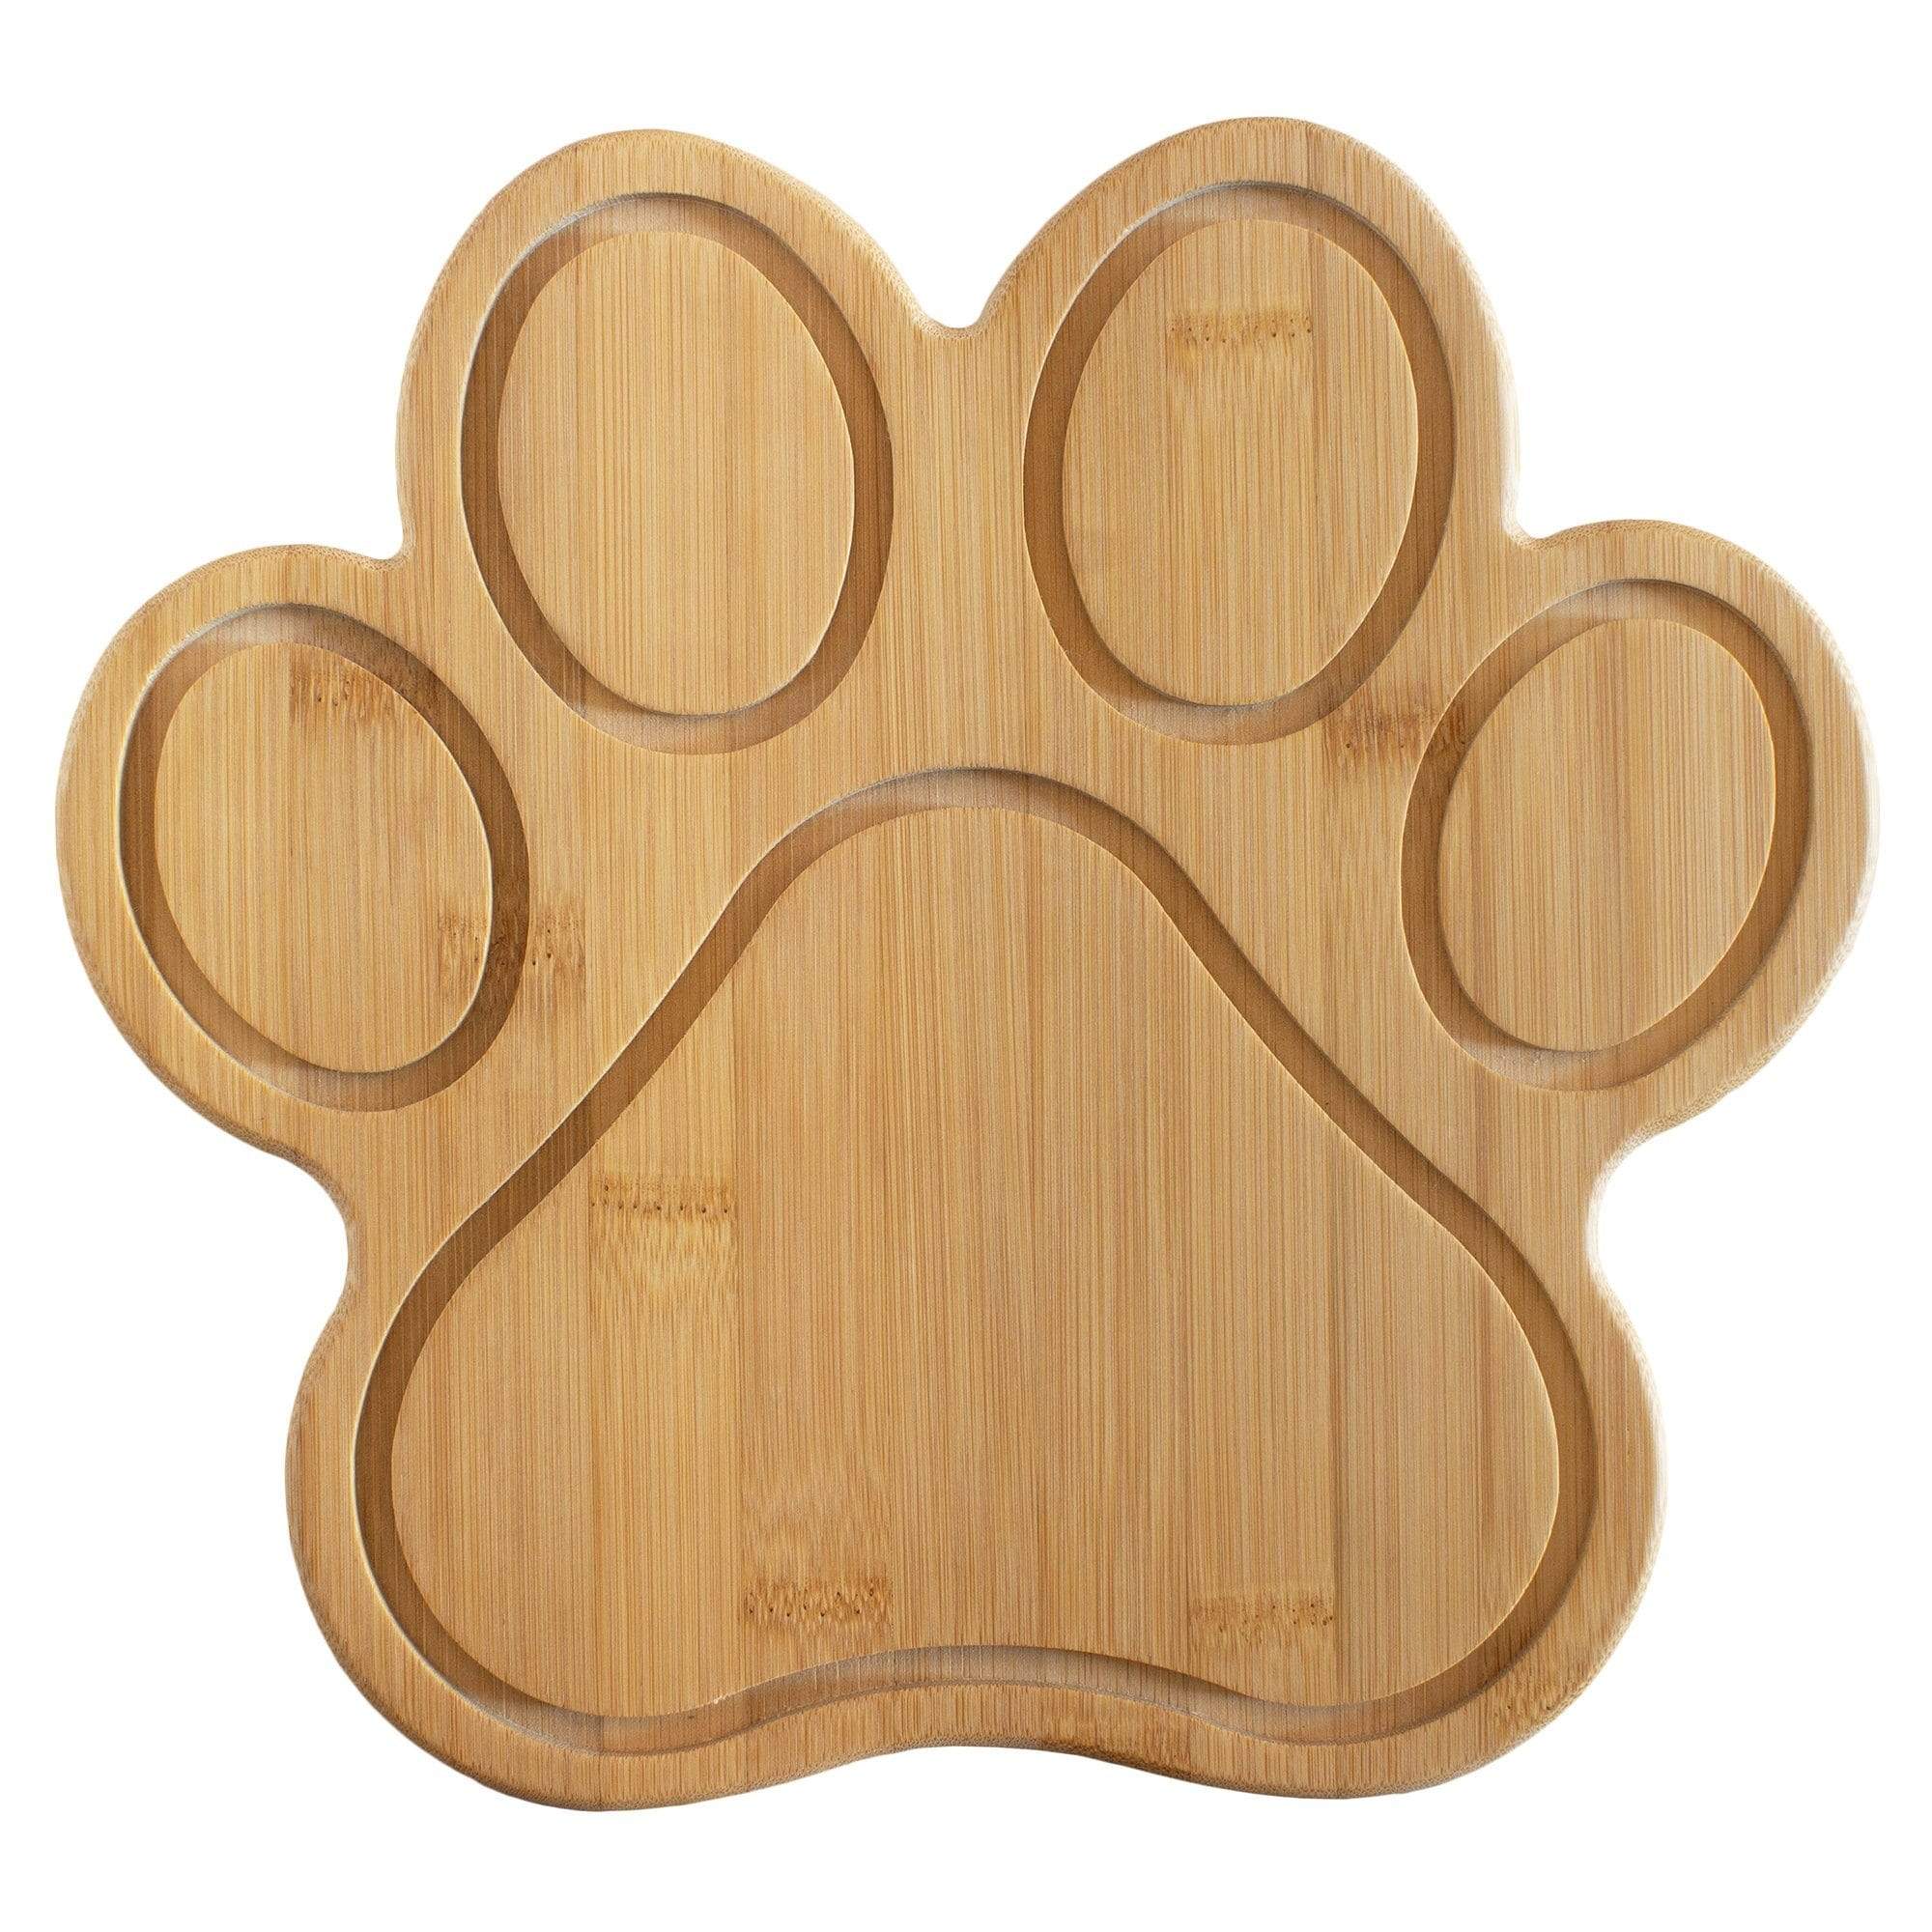 https://totallybamboo.com/cdn/shop/products/paw-shaped-serving-and-cutting-board-11-x-10-totally-bamboo-779526.jpg?v=1628051477